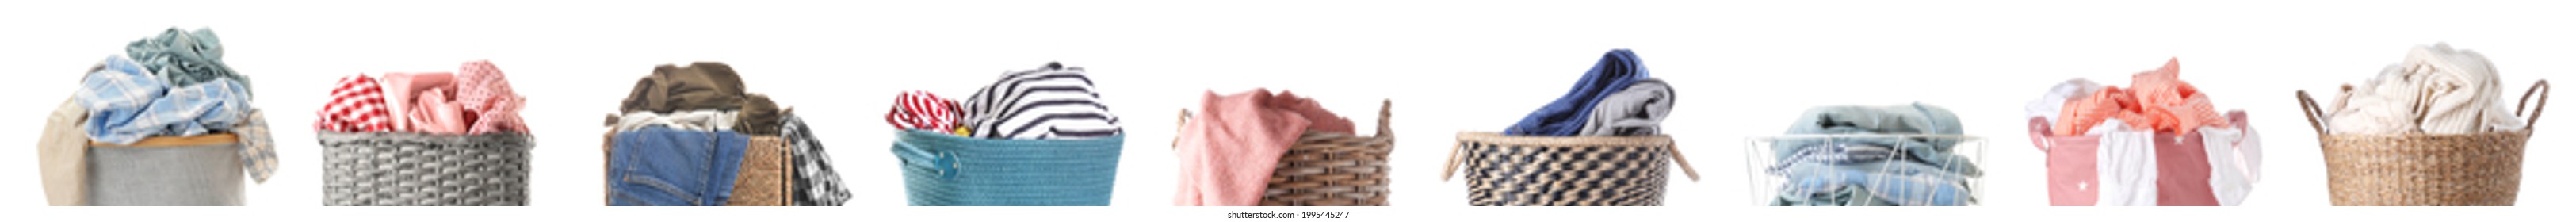 Laundry baskets with different dirty clothes on white background